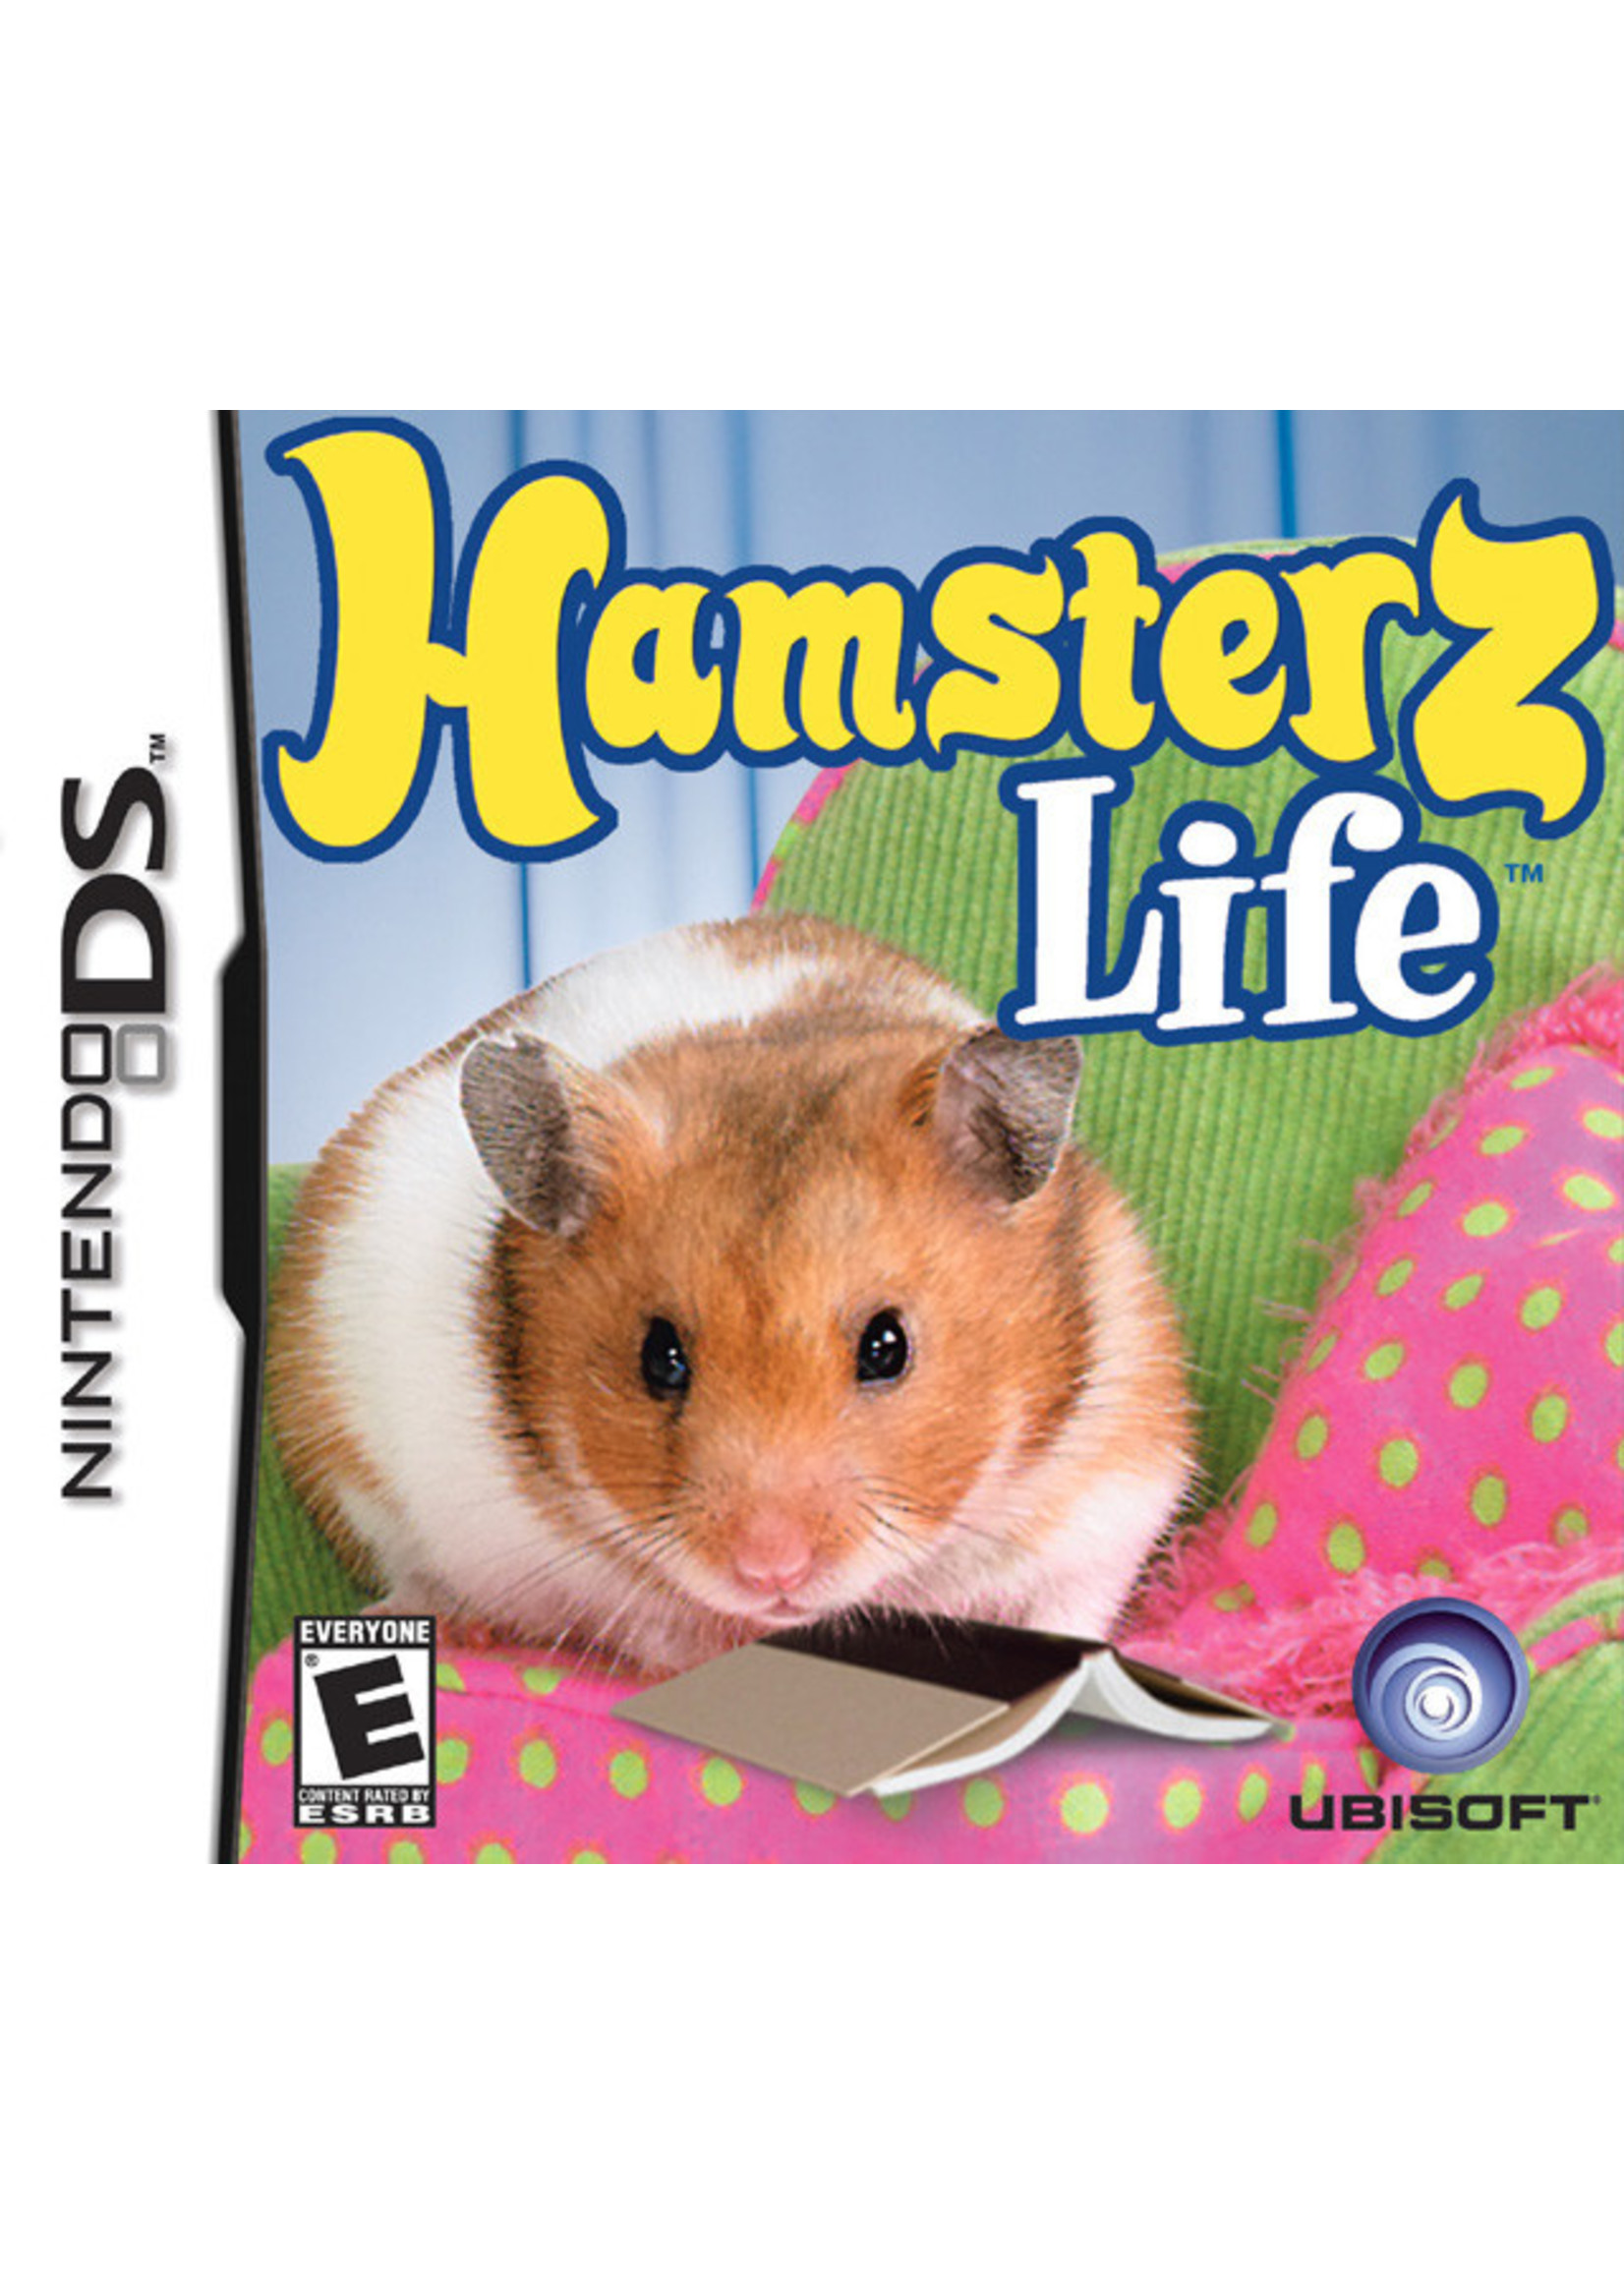 Nintendo DS Hamsterz Life - Cart Only